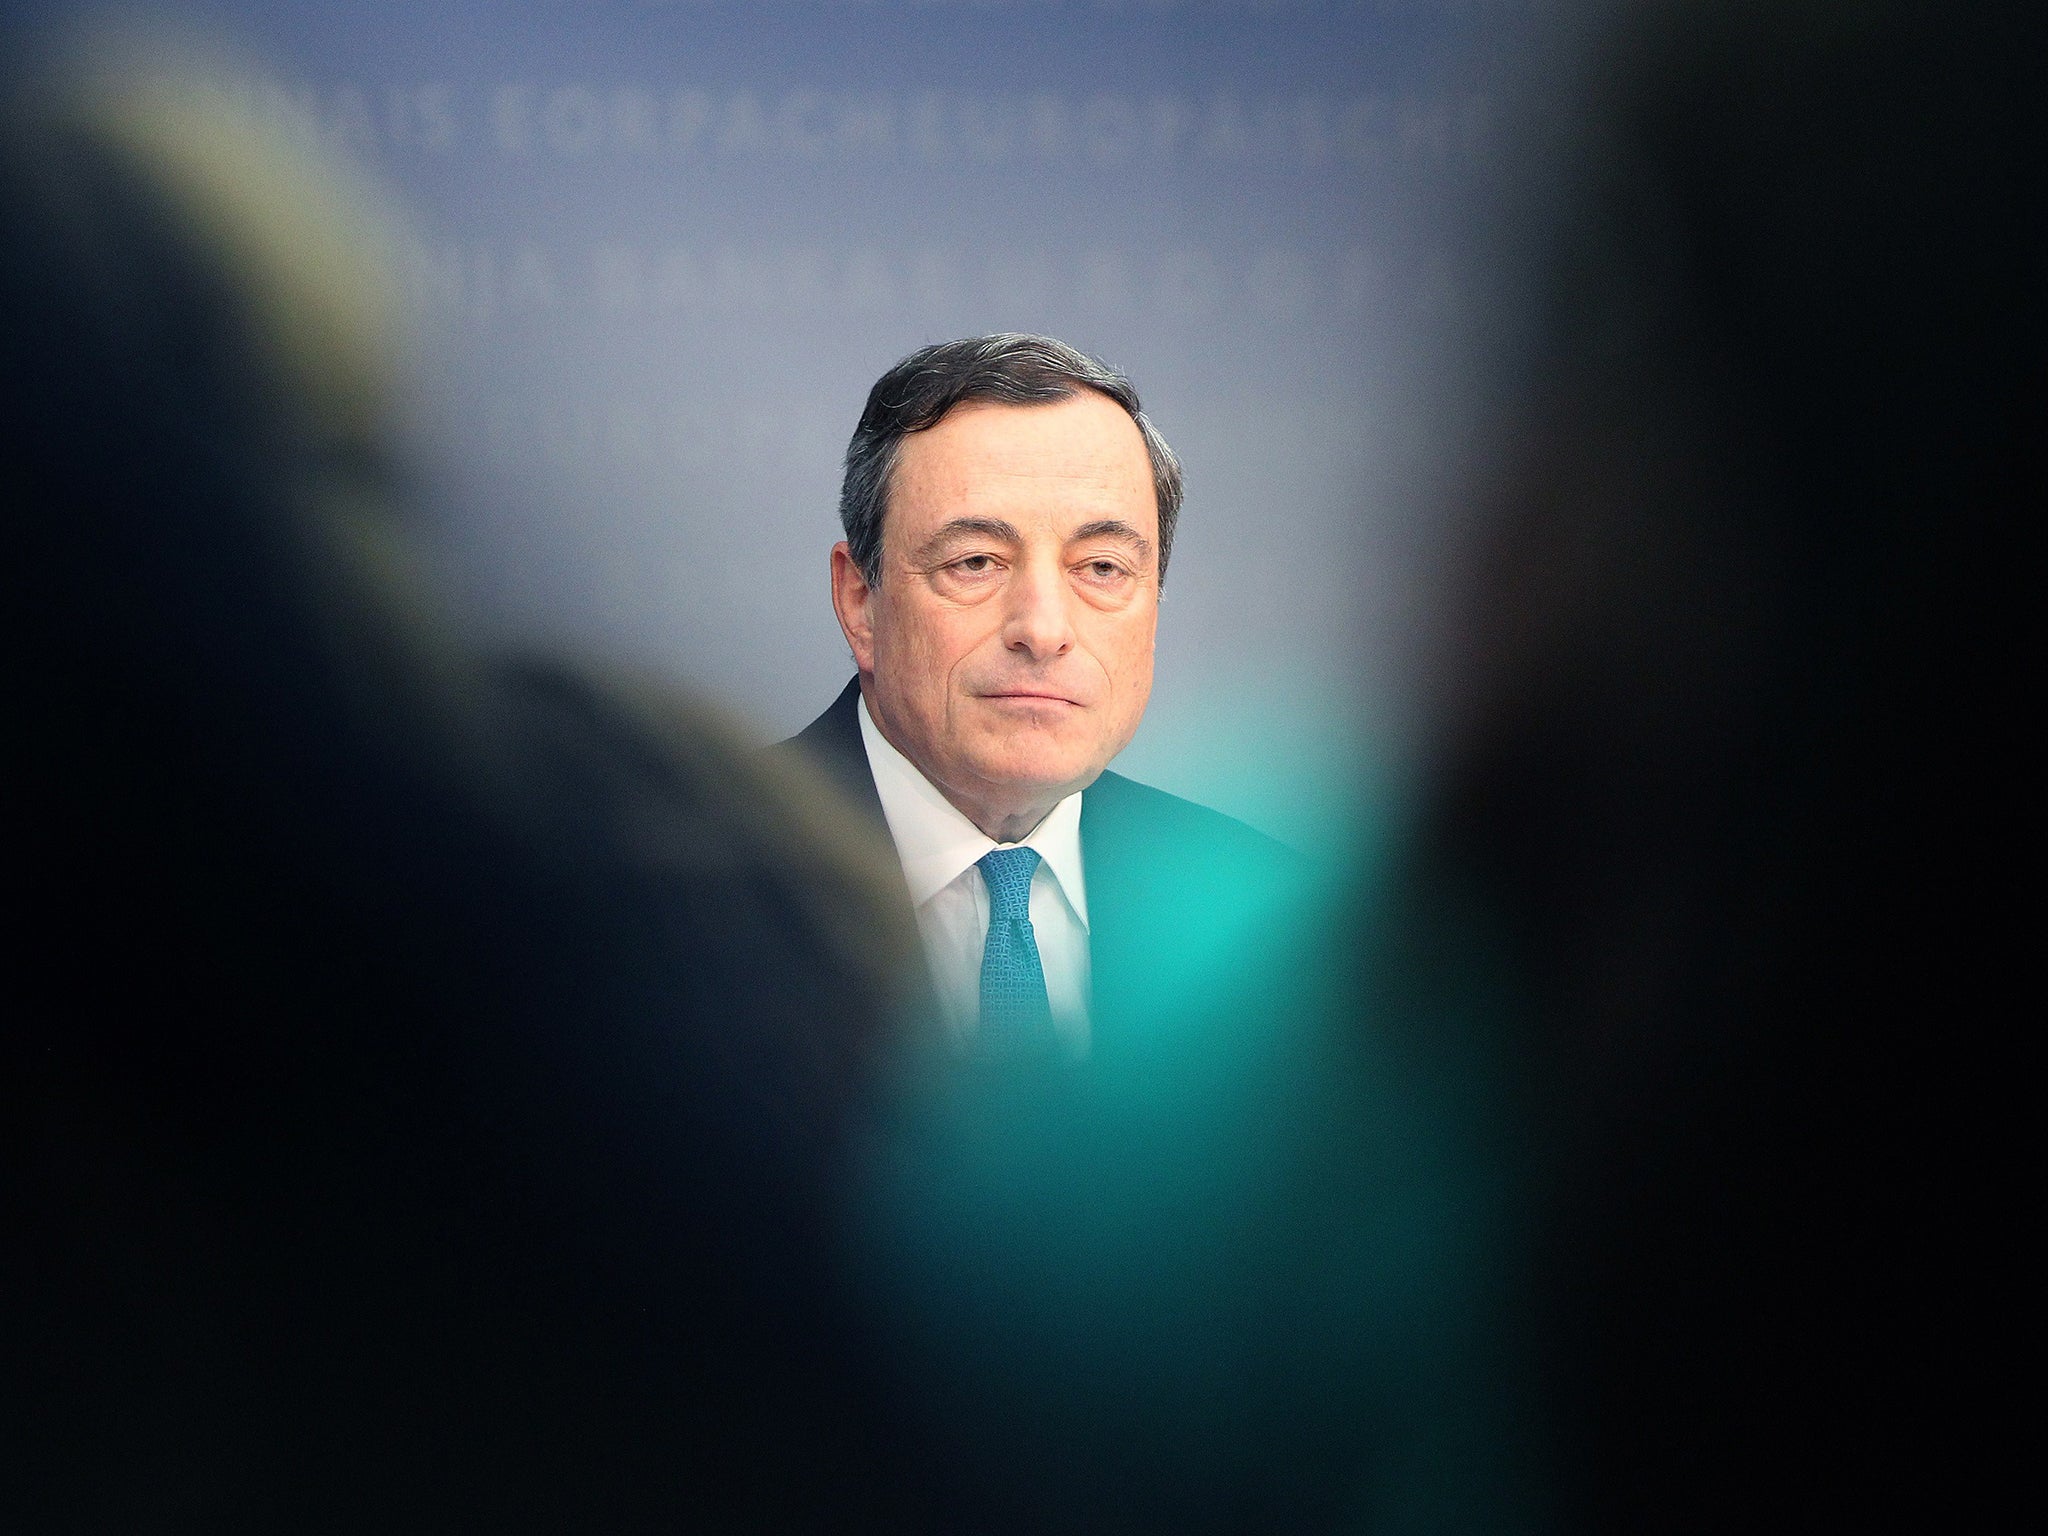 Mario Draghi, President of the European Central Bank, ECB addresses the media during a press conference following the meeting of the Governing Council in Frankfurt/Main, central Germany, on November 6, 2014.